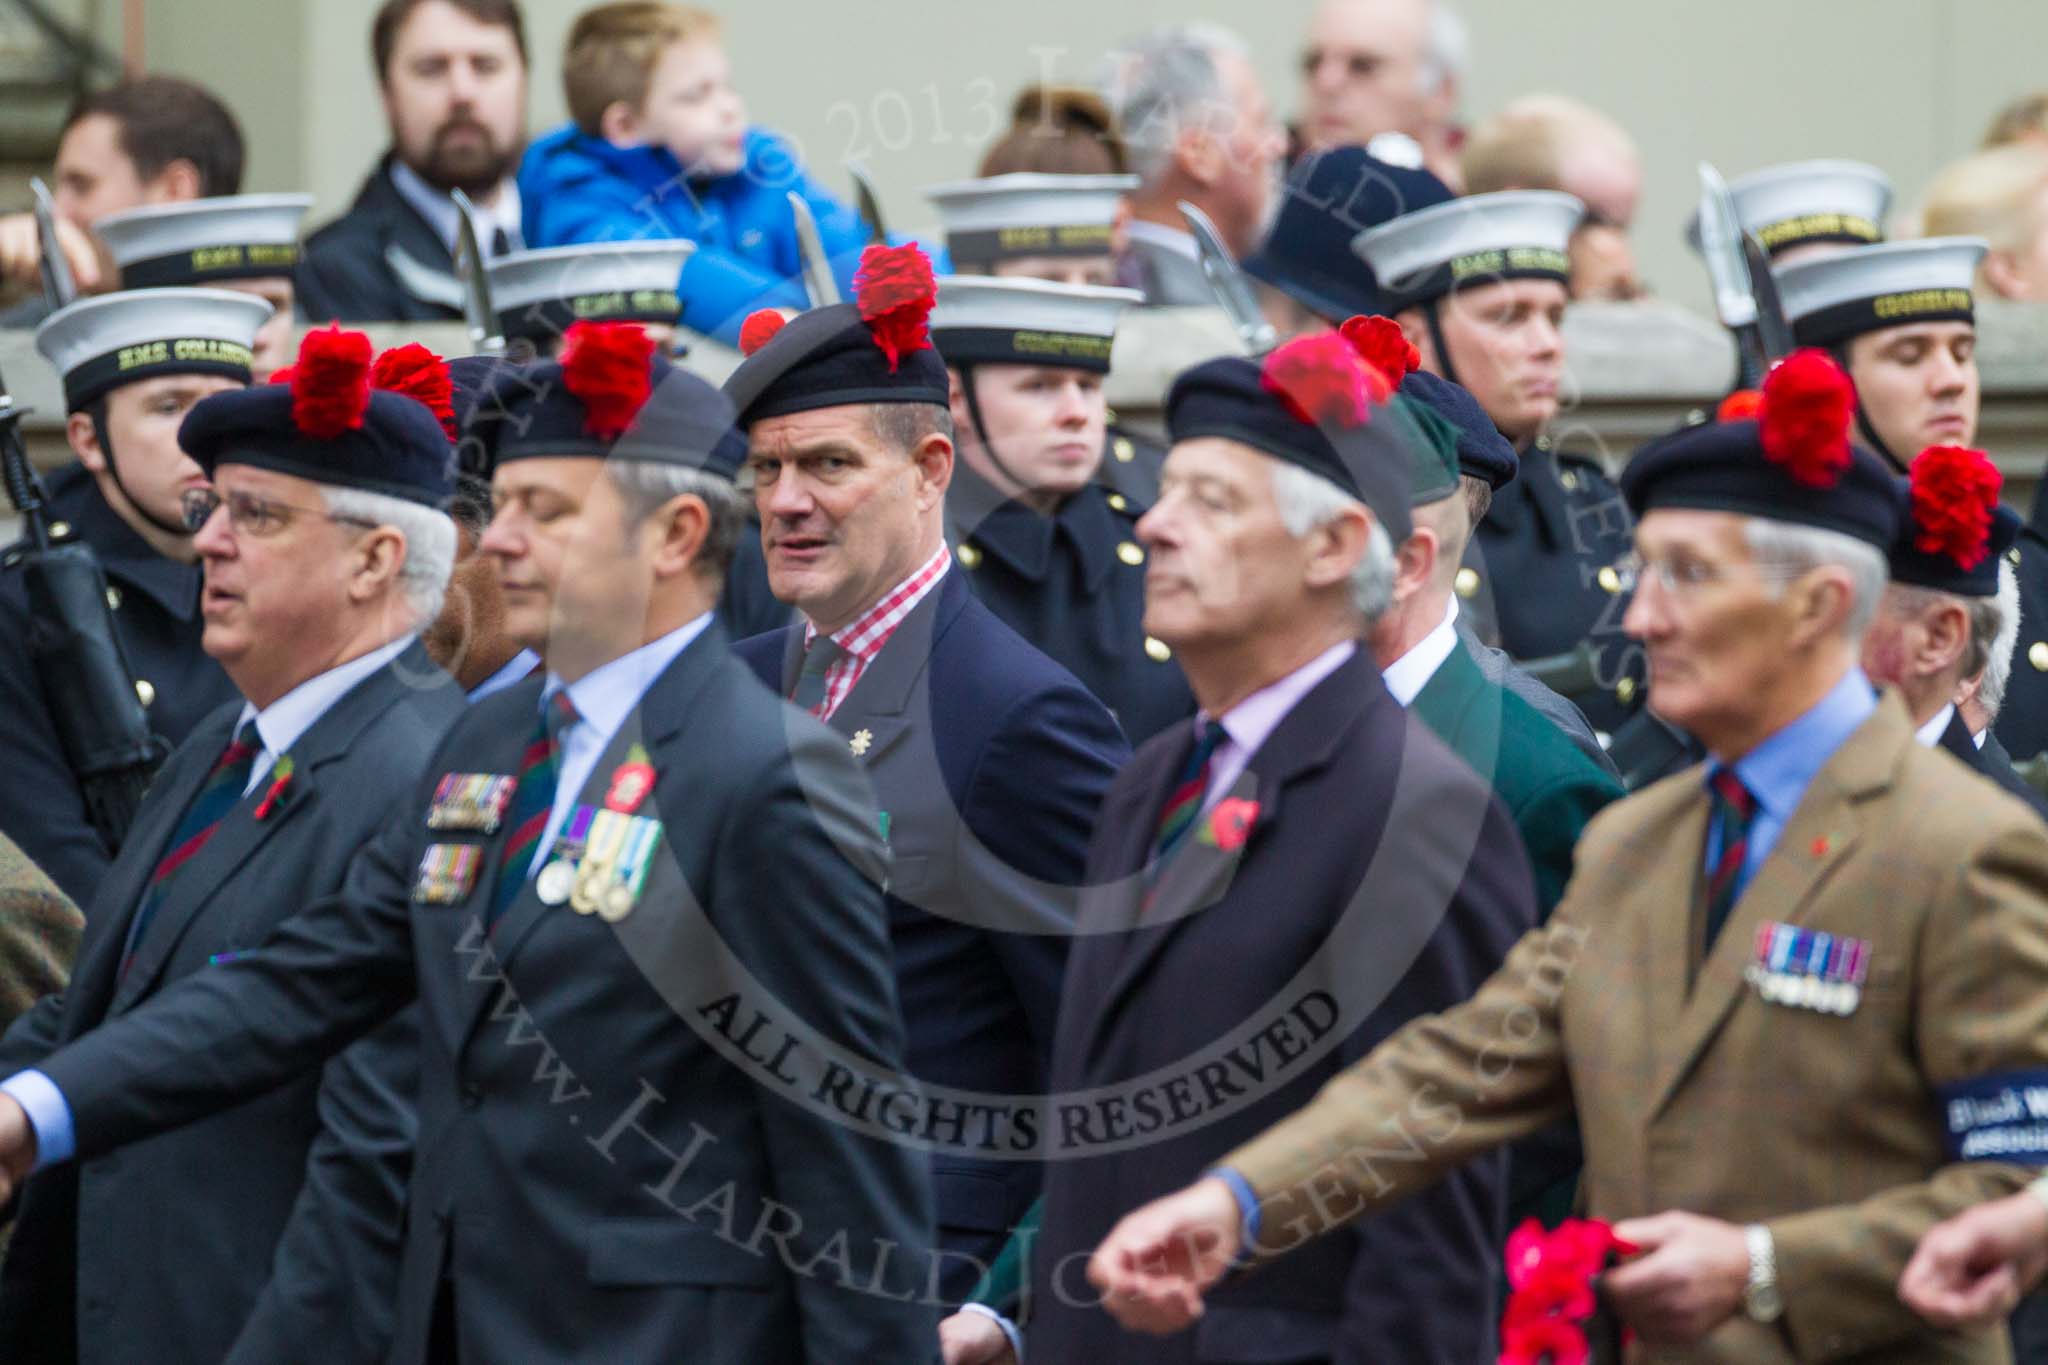 Remembrance Sunday at the Cenotaph 2015: Group A5, Black Watch Association.
Cenotaph, Whitehall, London SW1,
London,
Greater London,
United Kingdom,
on 08 November 2015 at 12:09, image #1212